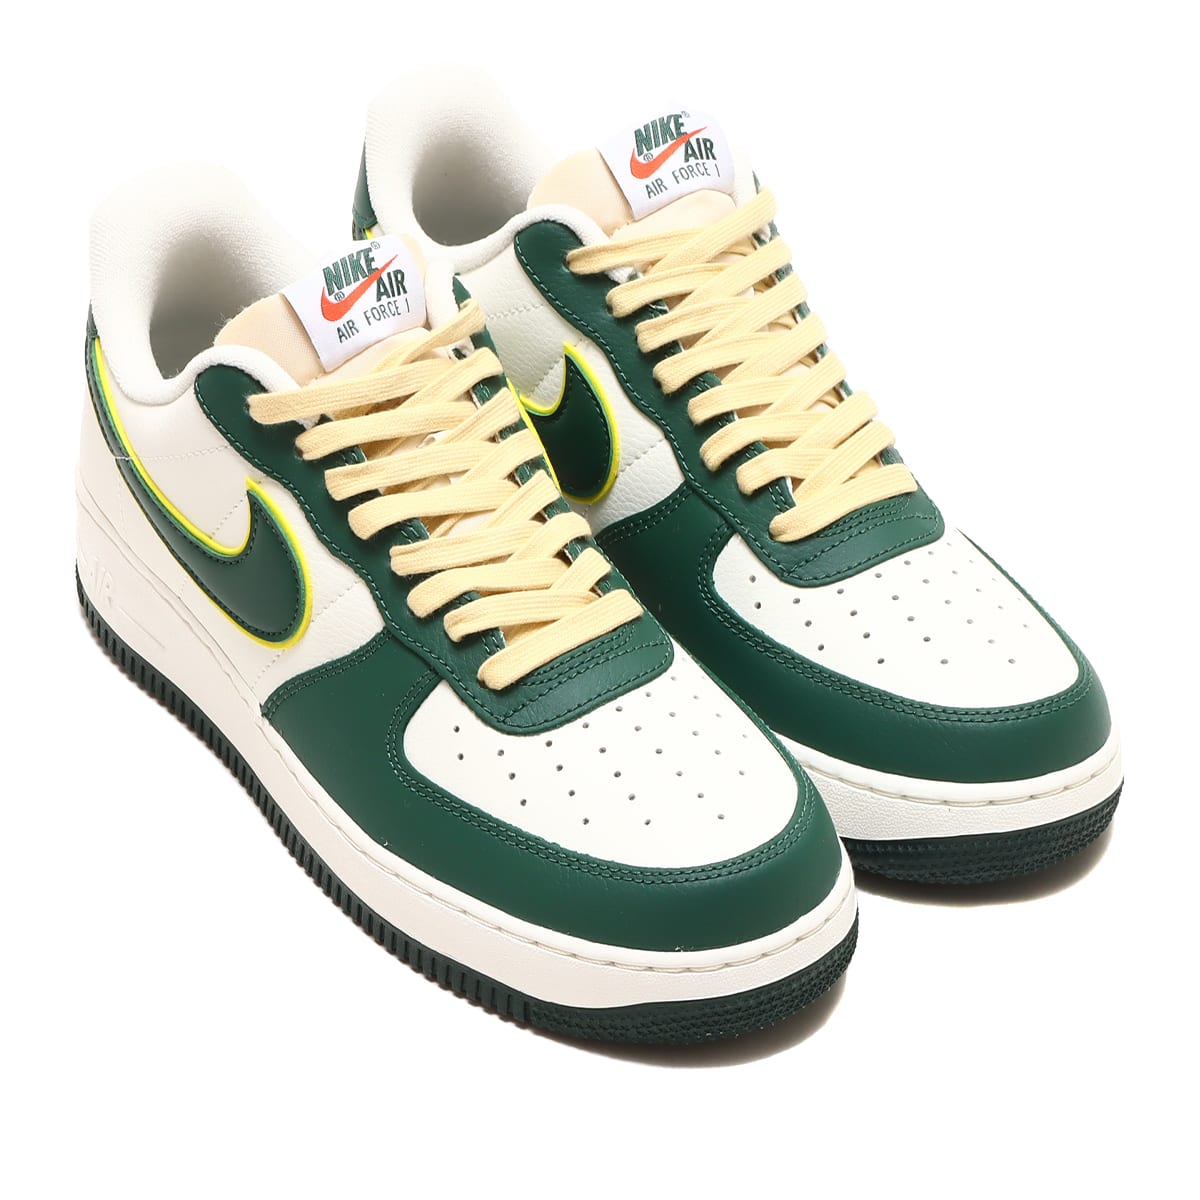 NIKE AIR FORCE 1 '07 LV8 SAIL/NOBLE GREEN-OPTI YELLOW-PICANTE RED 